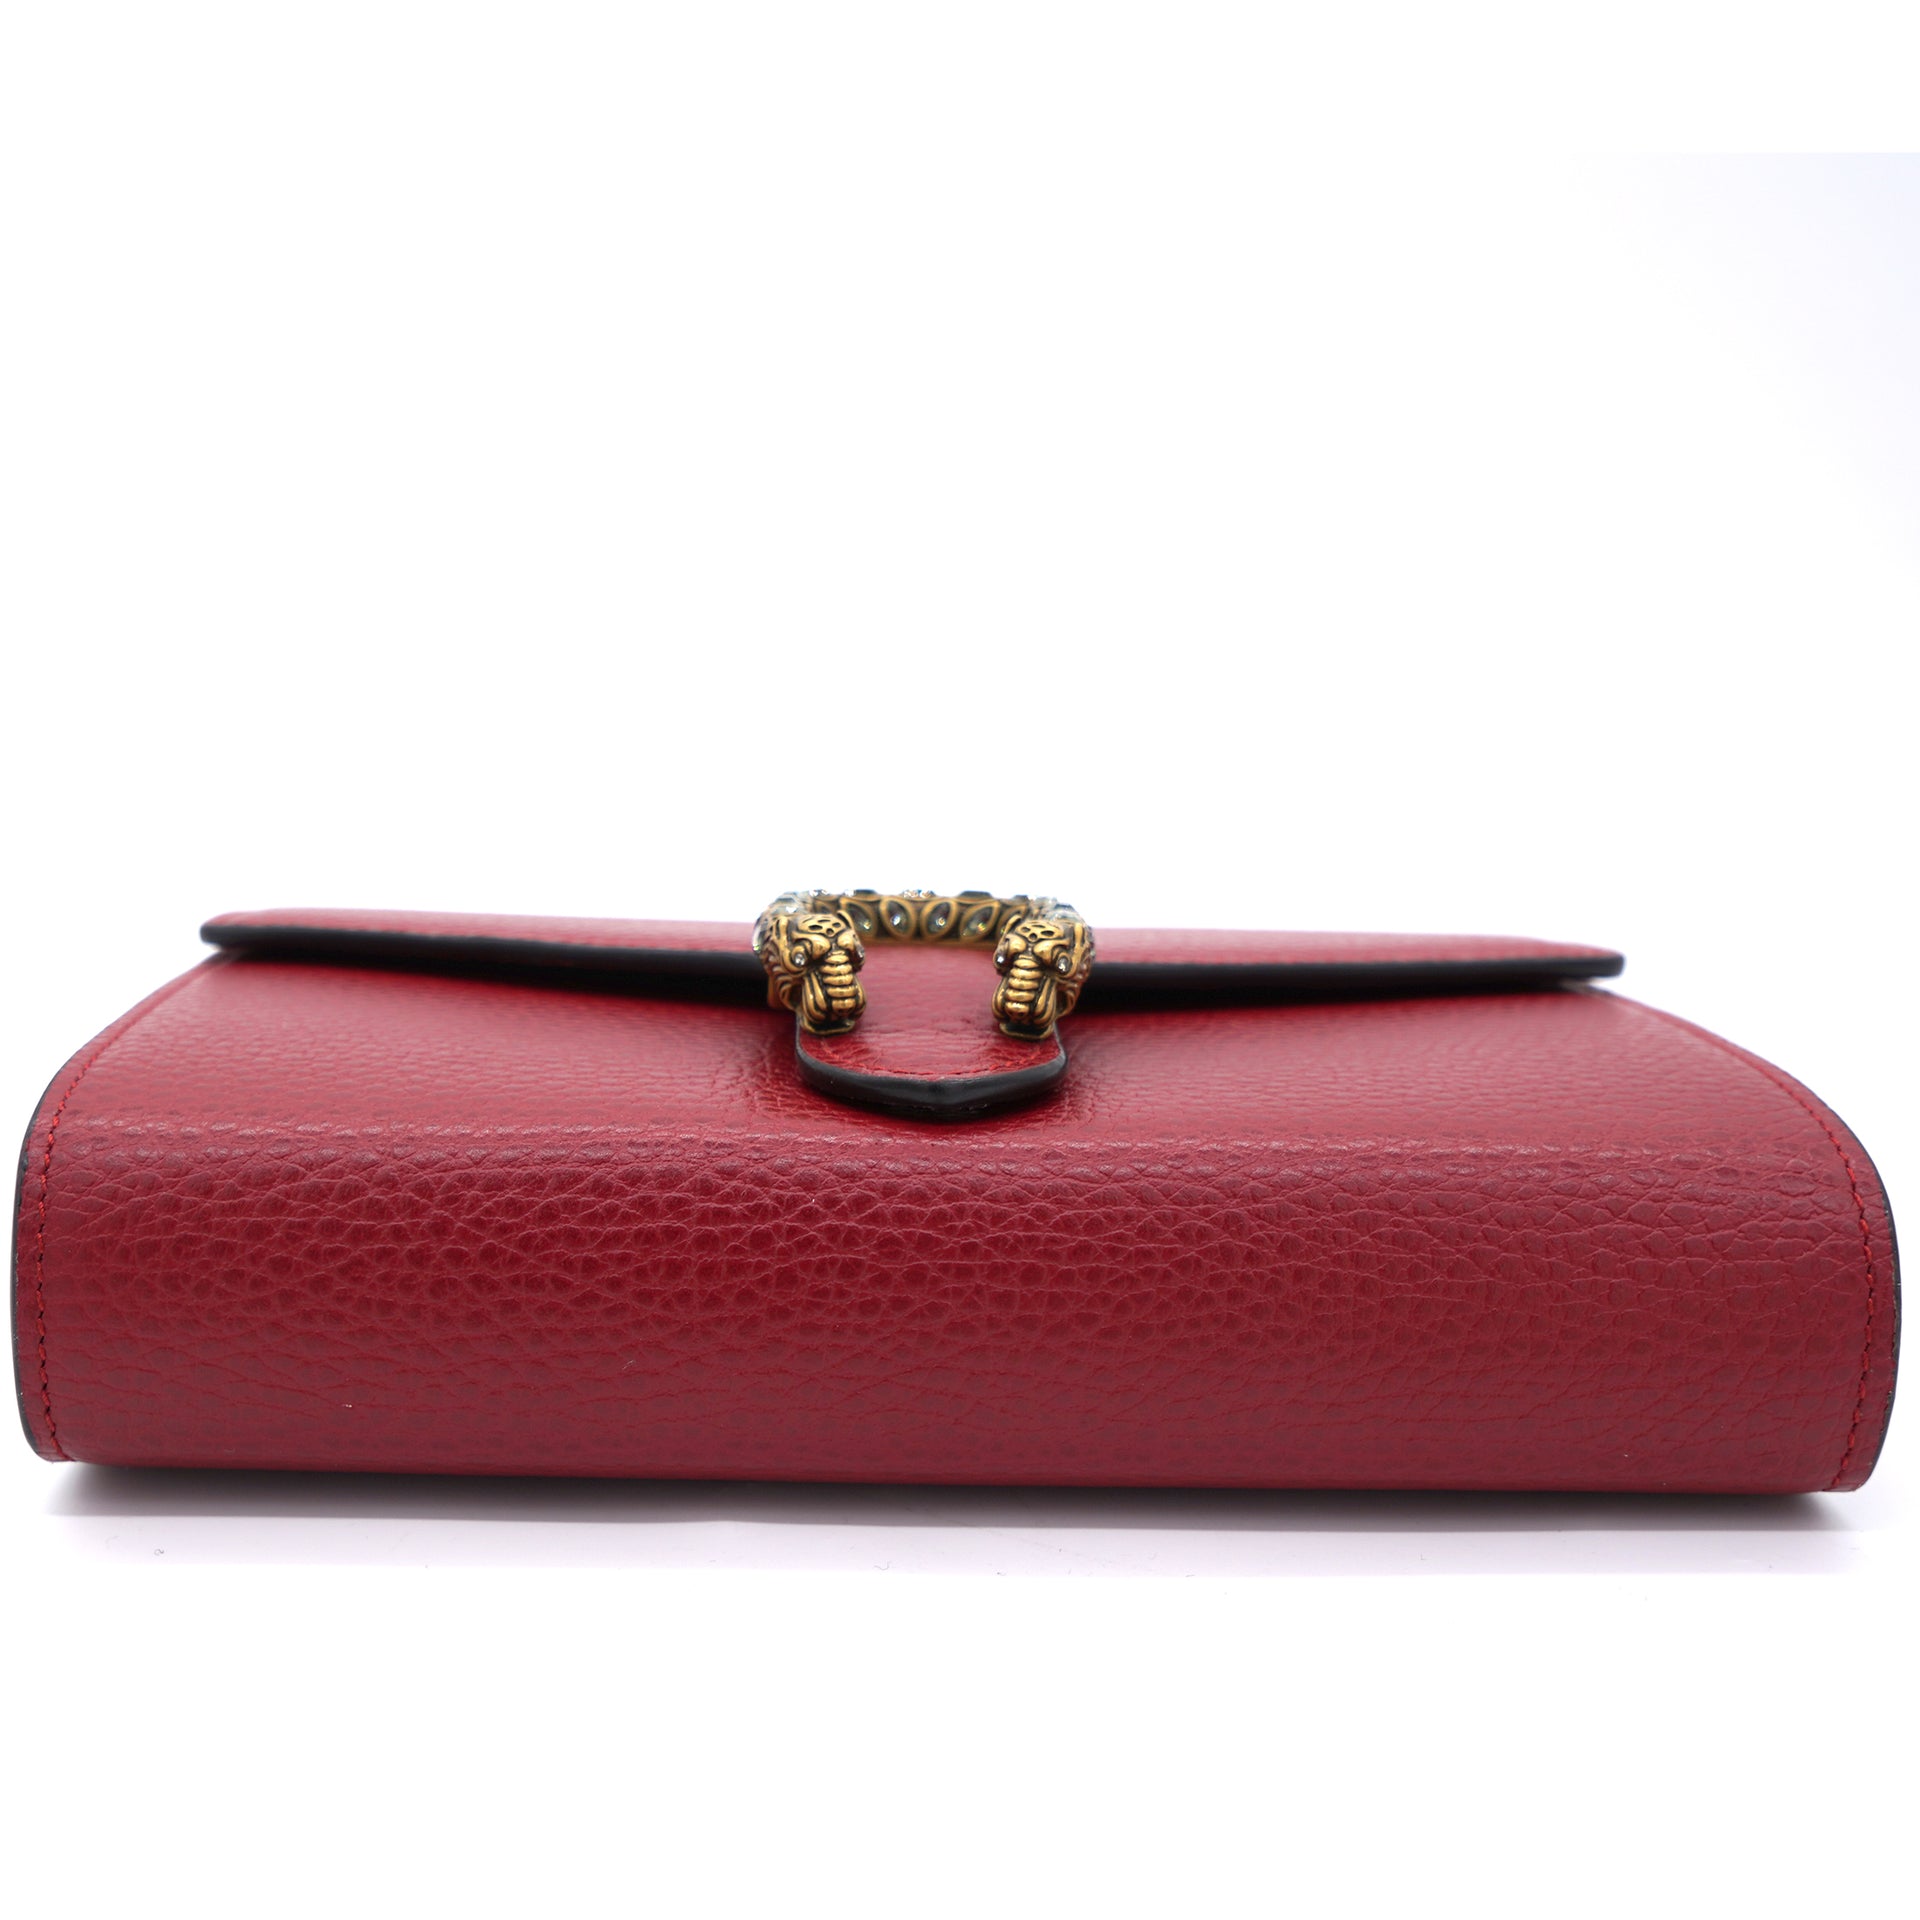 Red Leather Dionysus Wallet On Chain